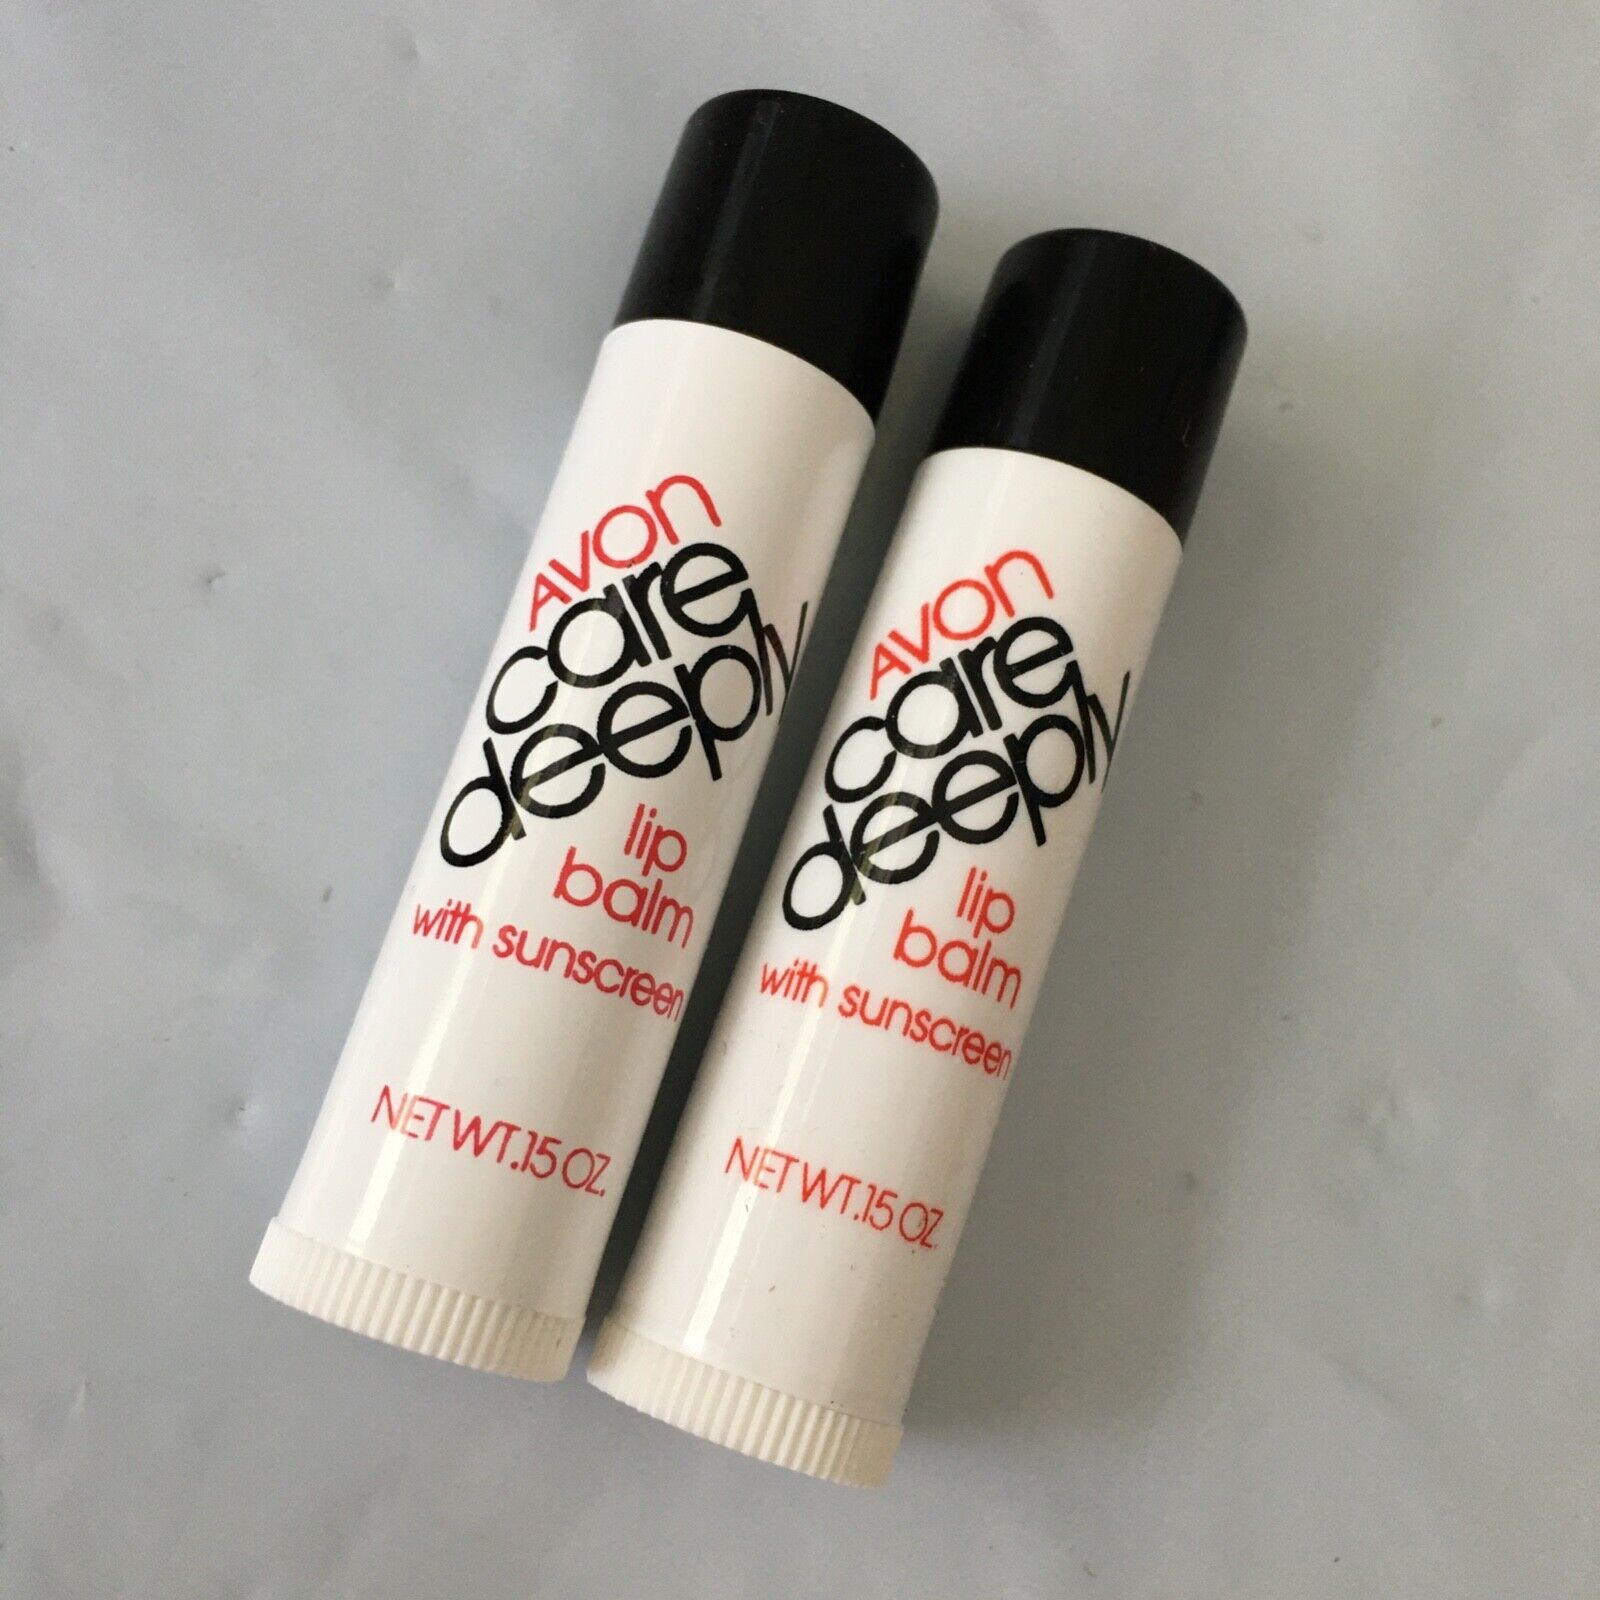 NOS 1982 Lot of 2 Avon Care Deeply with Sunscreen Lip Balm .15 oz Movie